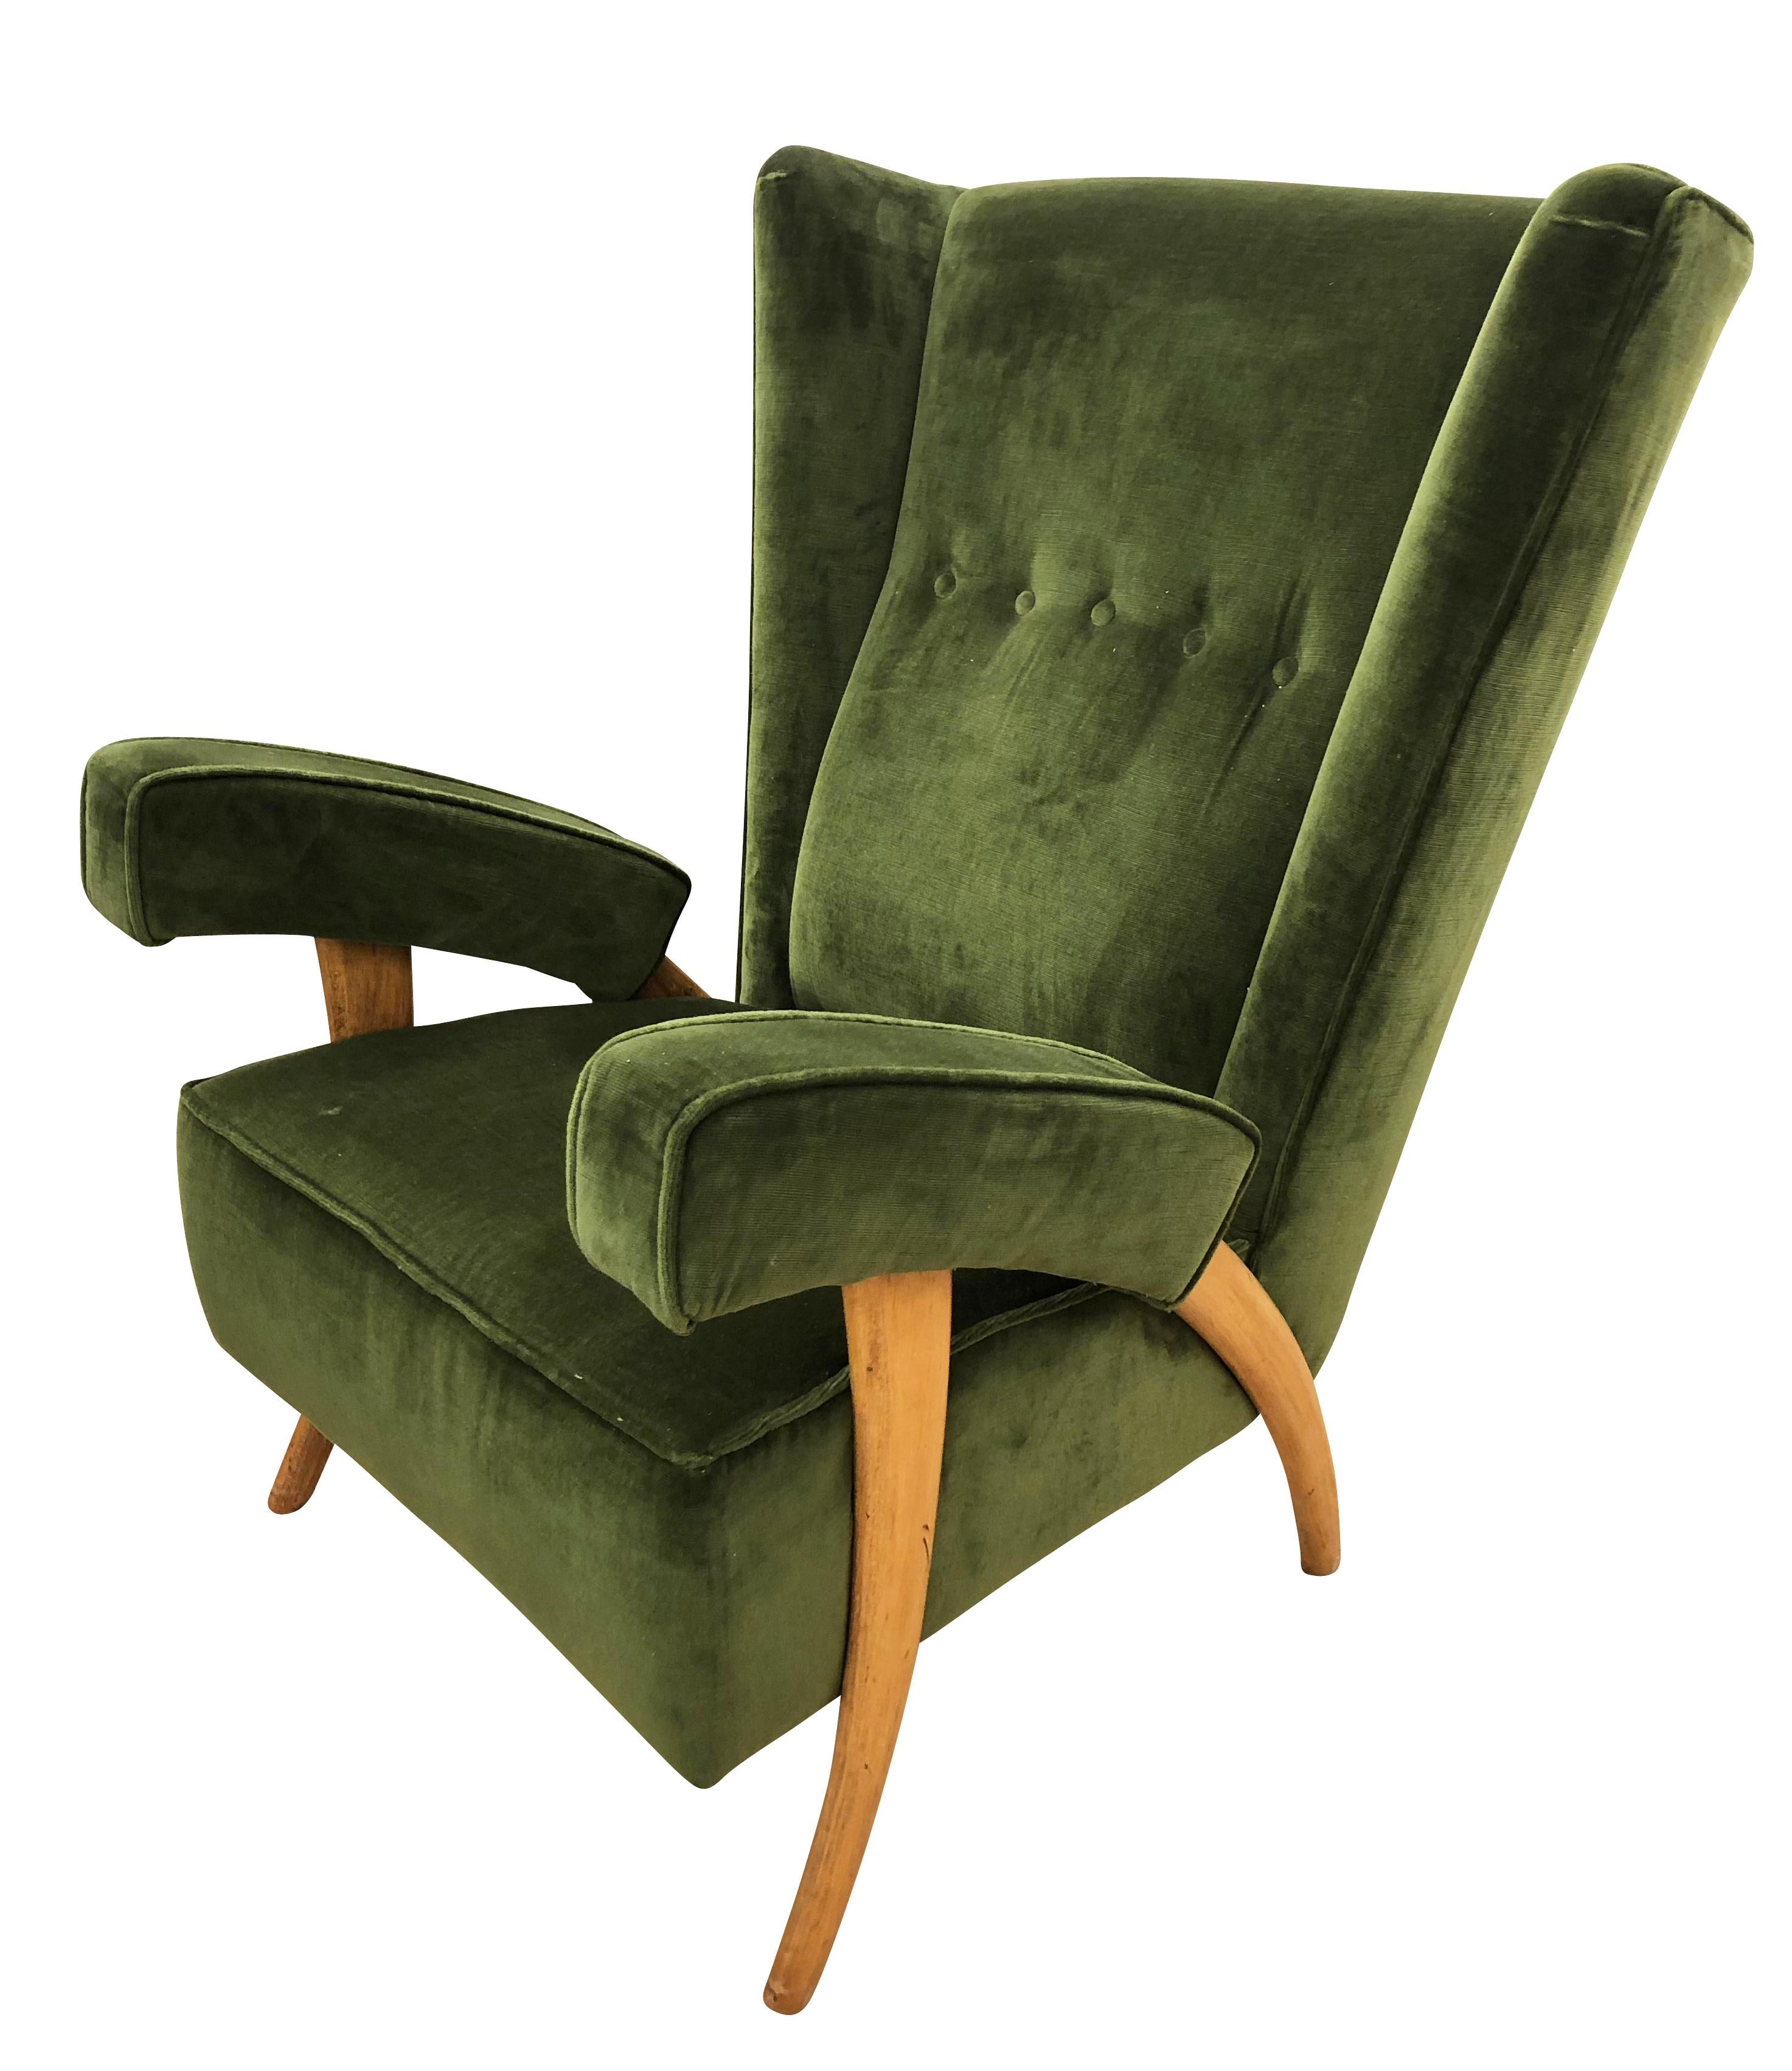 Pair of beautiful 1950s Paolo Buffa lounge chairs with “tusk” shaped legs. Upholstered in a dark green velvet.

Condition: Excellent vintage condition, minor wear consistent with age and use.

Measures: Width 28”

Depth 31”.

Height